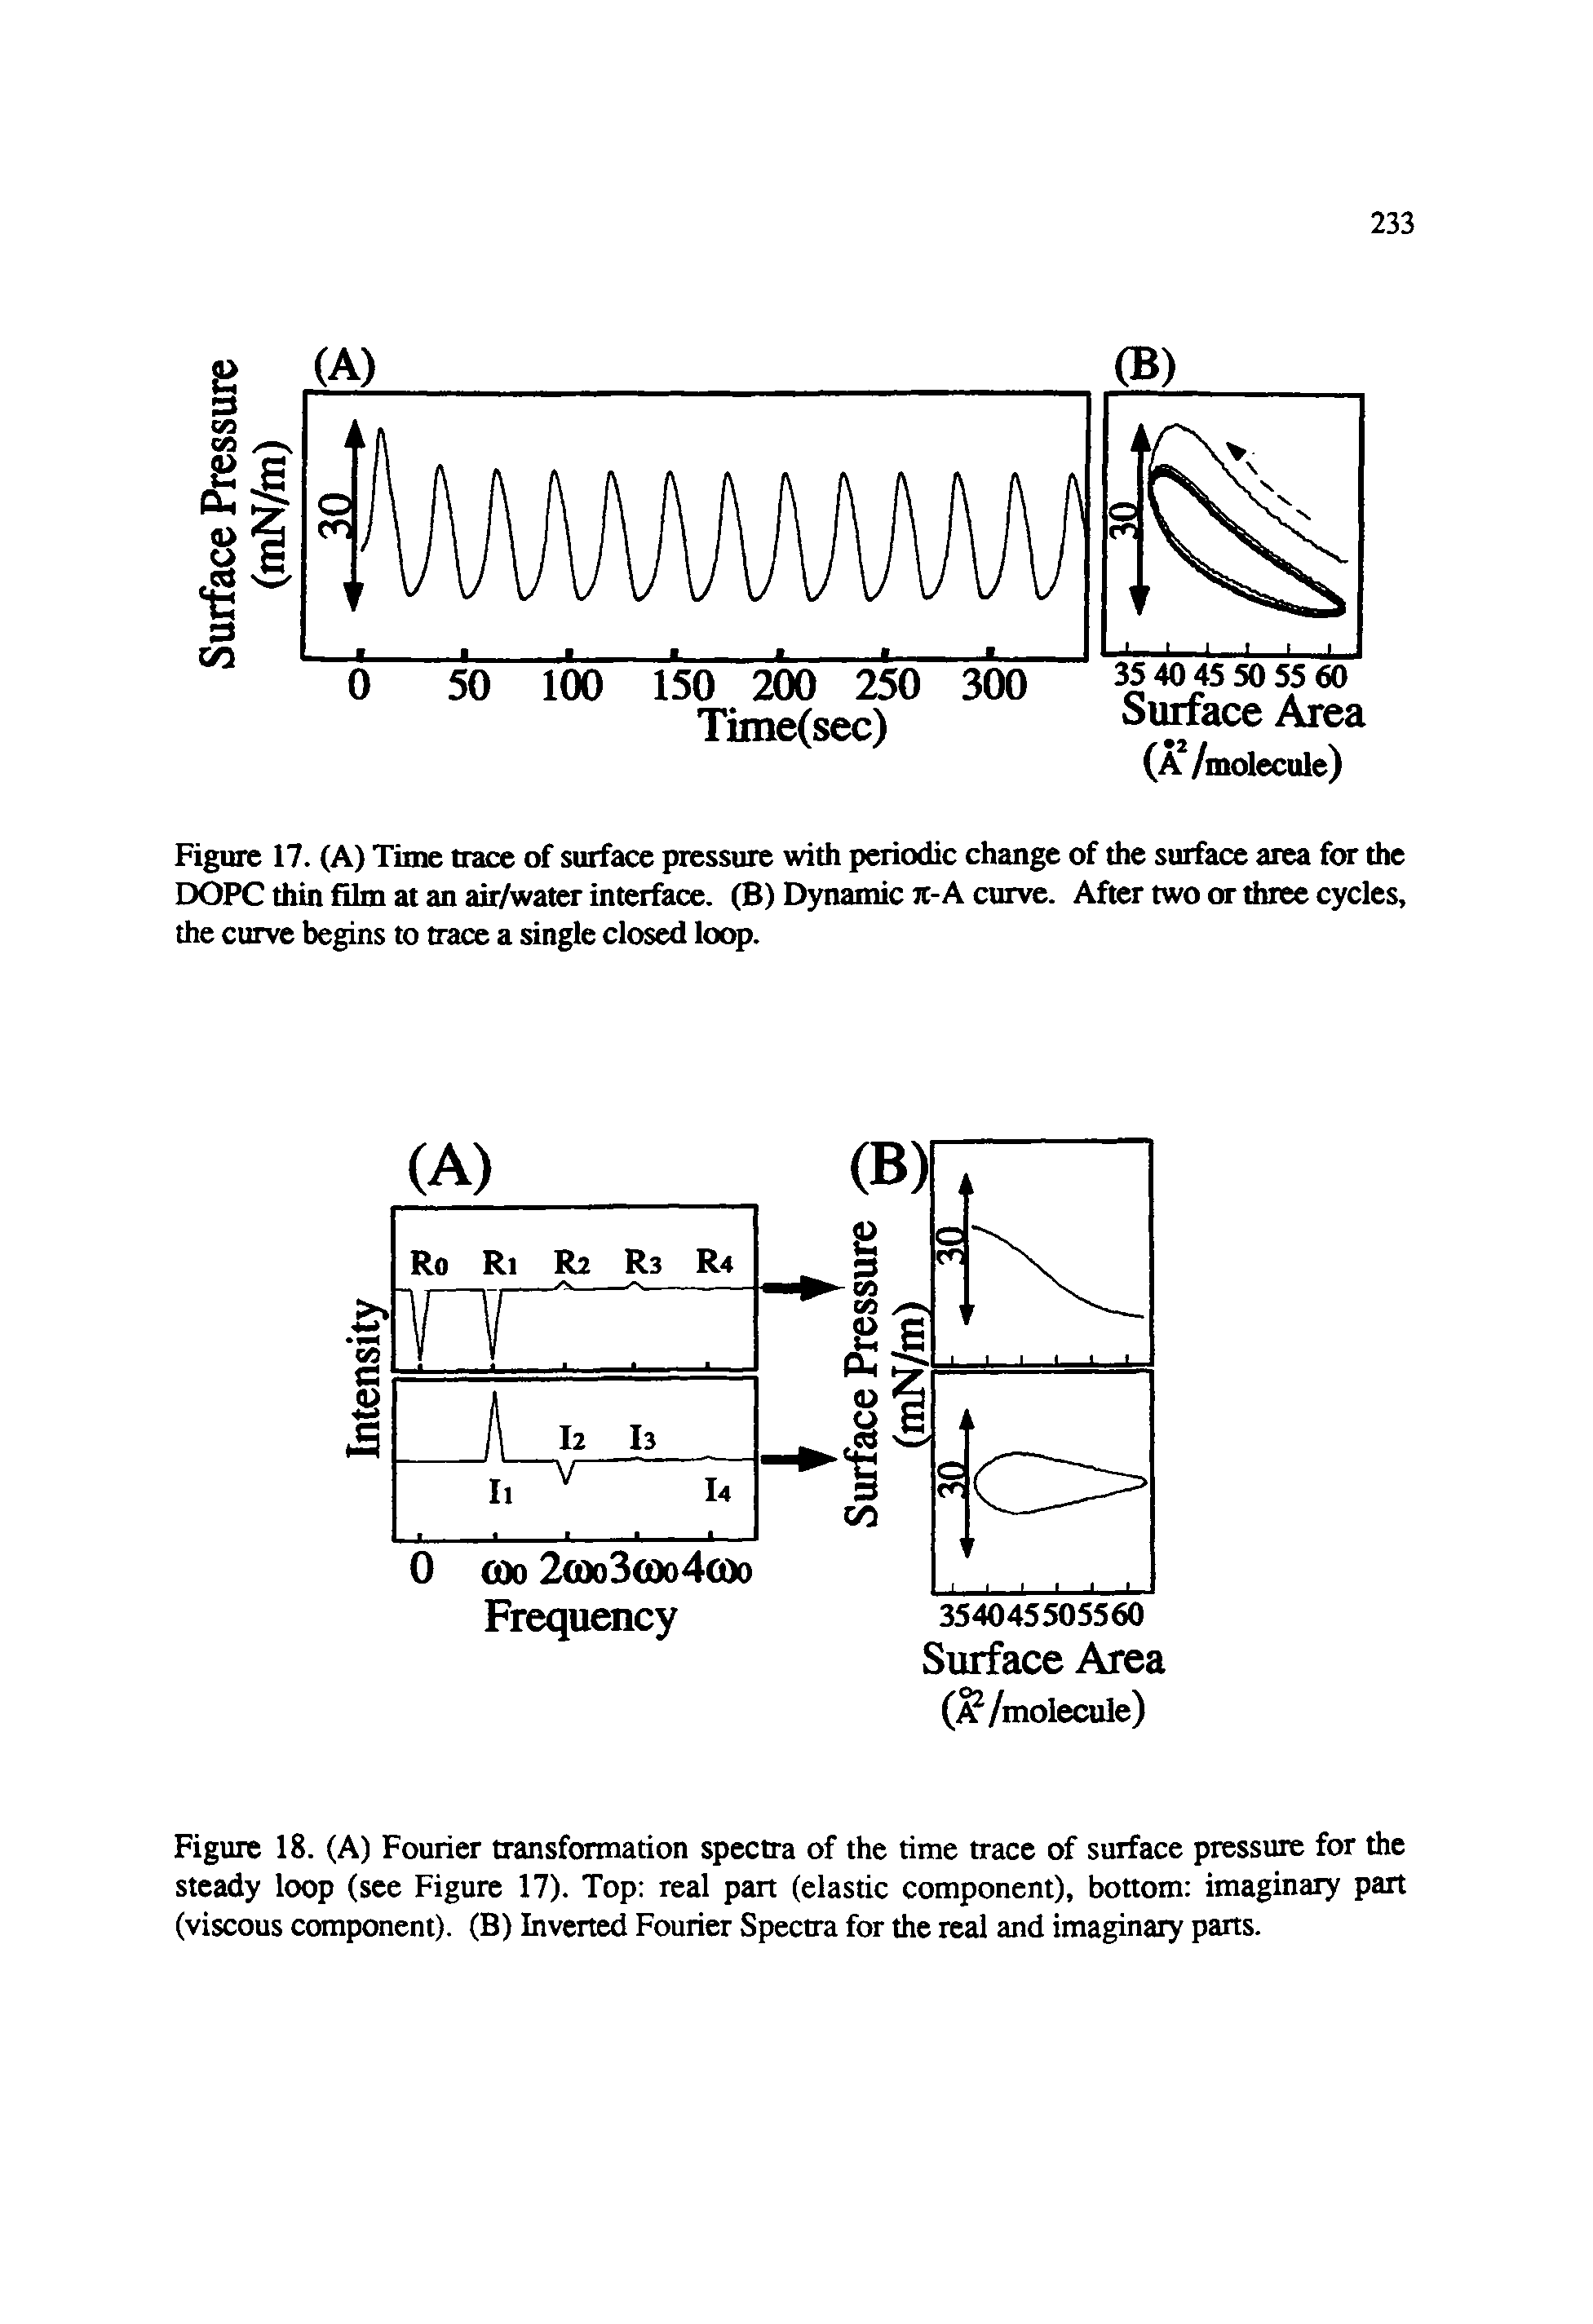 Figure 17. (A) Time trace of surface pressure with periodic change of the surface area for the DOPC thin film at an air/water interface. (B) Dynamic it-A curve. After two or three cycles, the curve begins to trace a single closed loop.